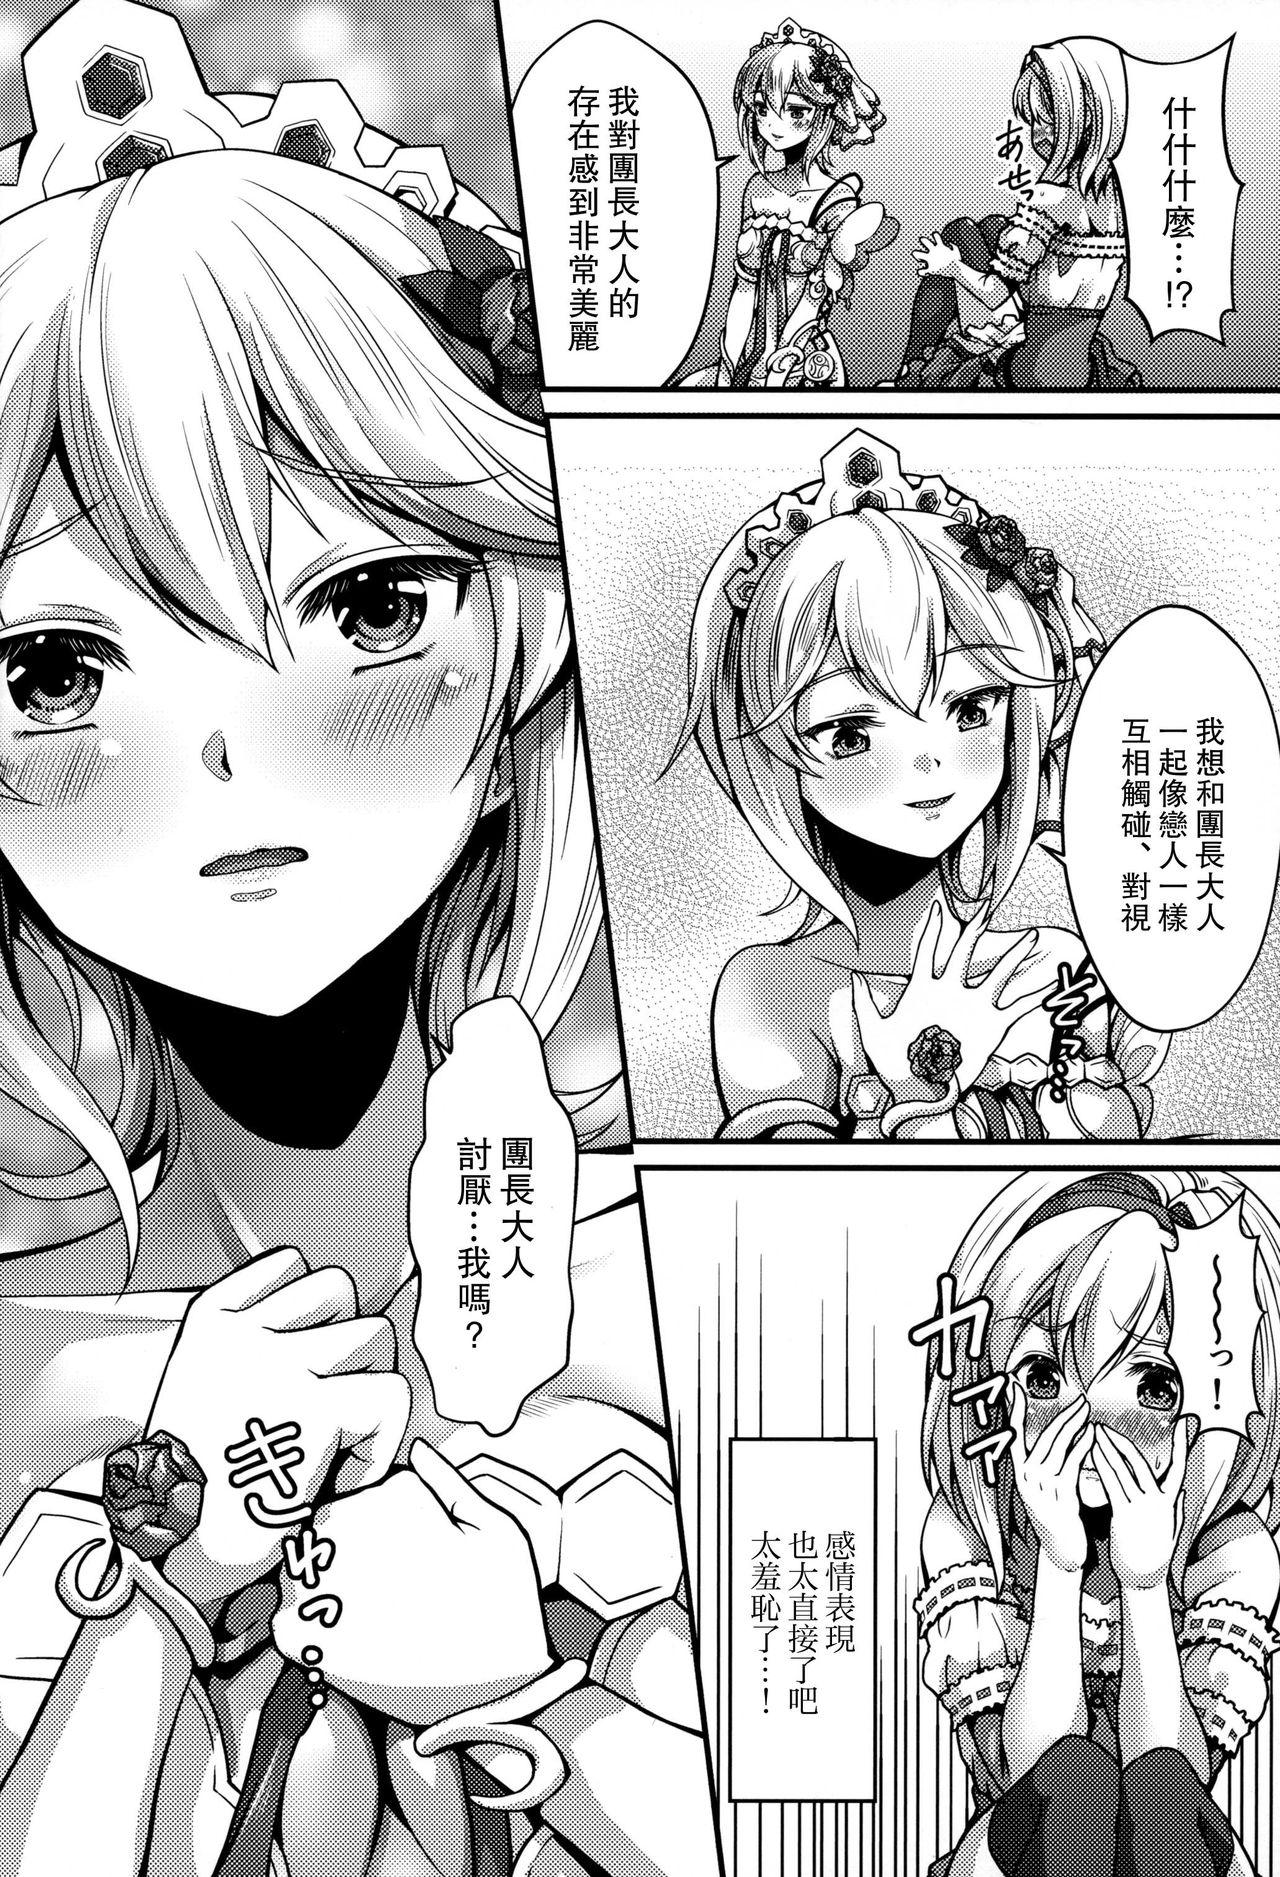 Sexy Princess is Seeking Unknown - Granblue fantasy Best Blowjob Ever - Page 9